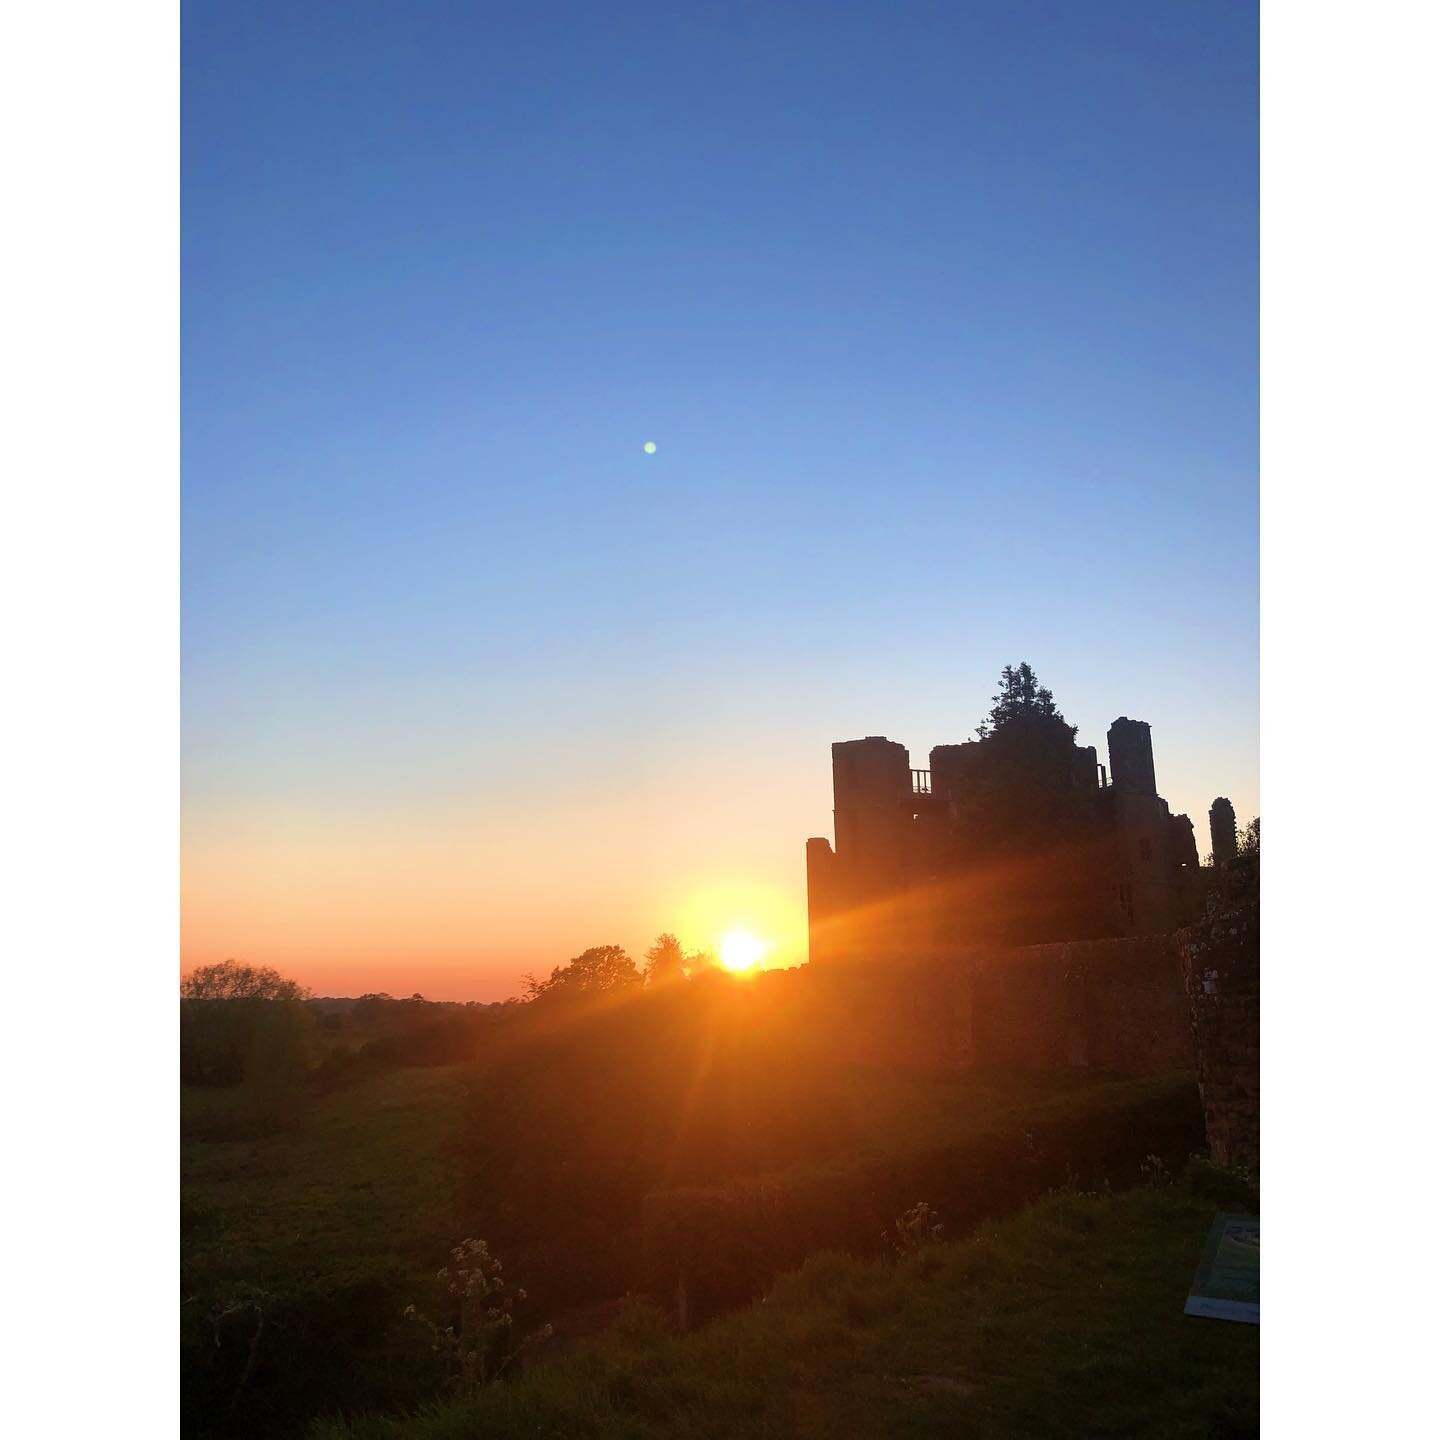 🎡 Eats &amp; Beats Festival 🎡
We&rsquo;re so excited to announce that we will be at the Eats &amp; Beats festival at Kenilworth Castle this Friday! Lots of great food stalls, live music and of course the best views in town 🏰
.
We&rsquo;ll be bring